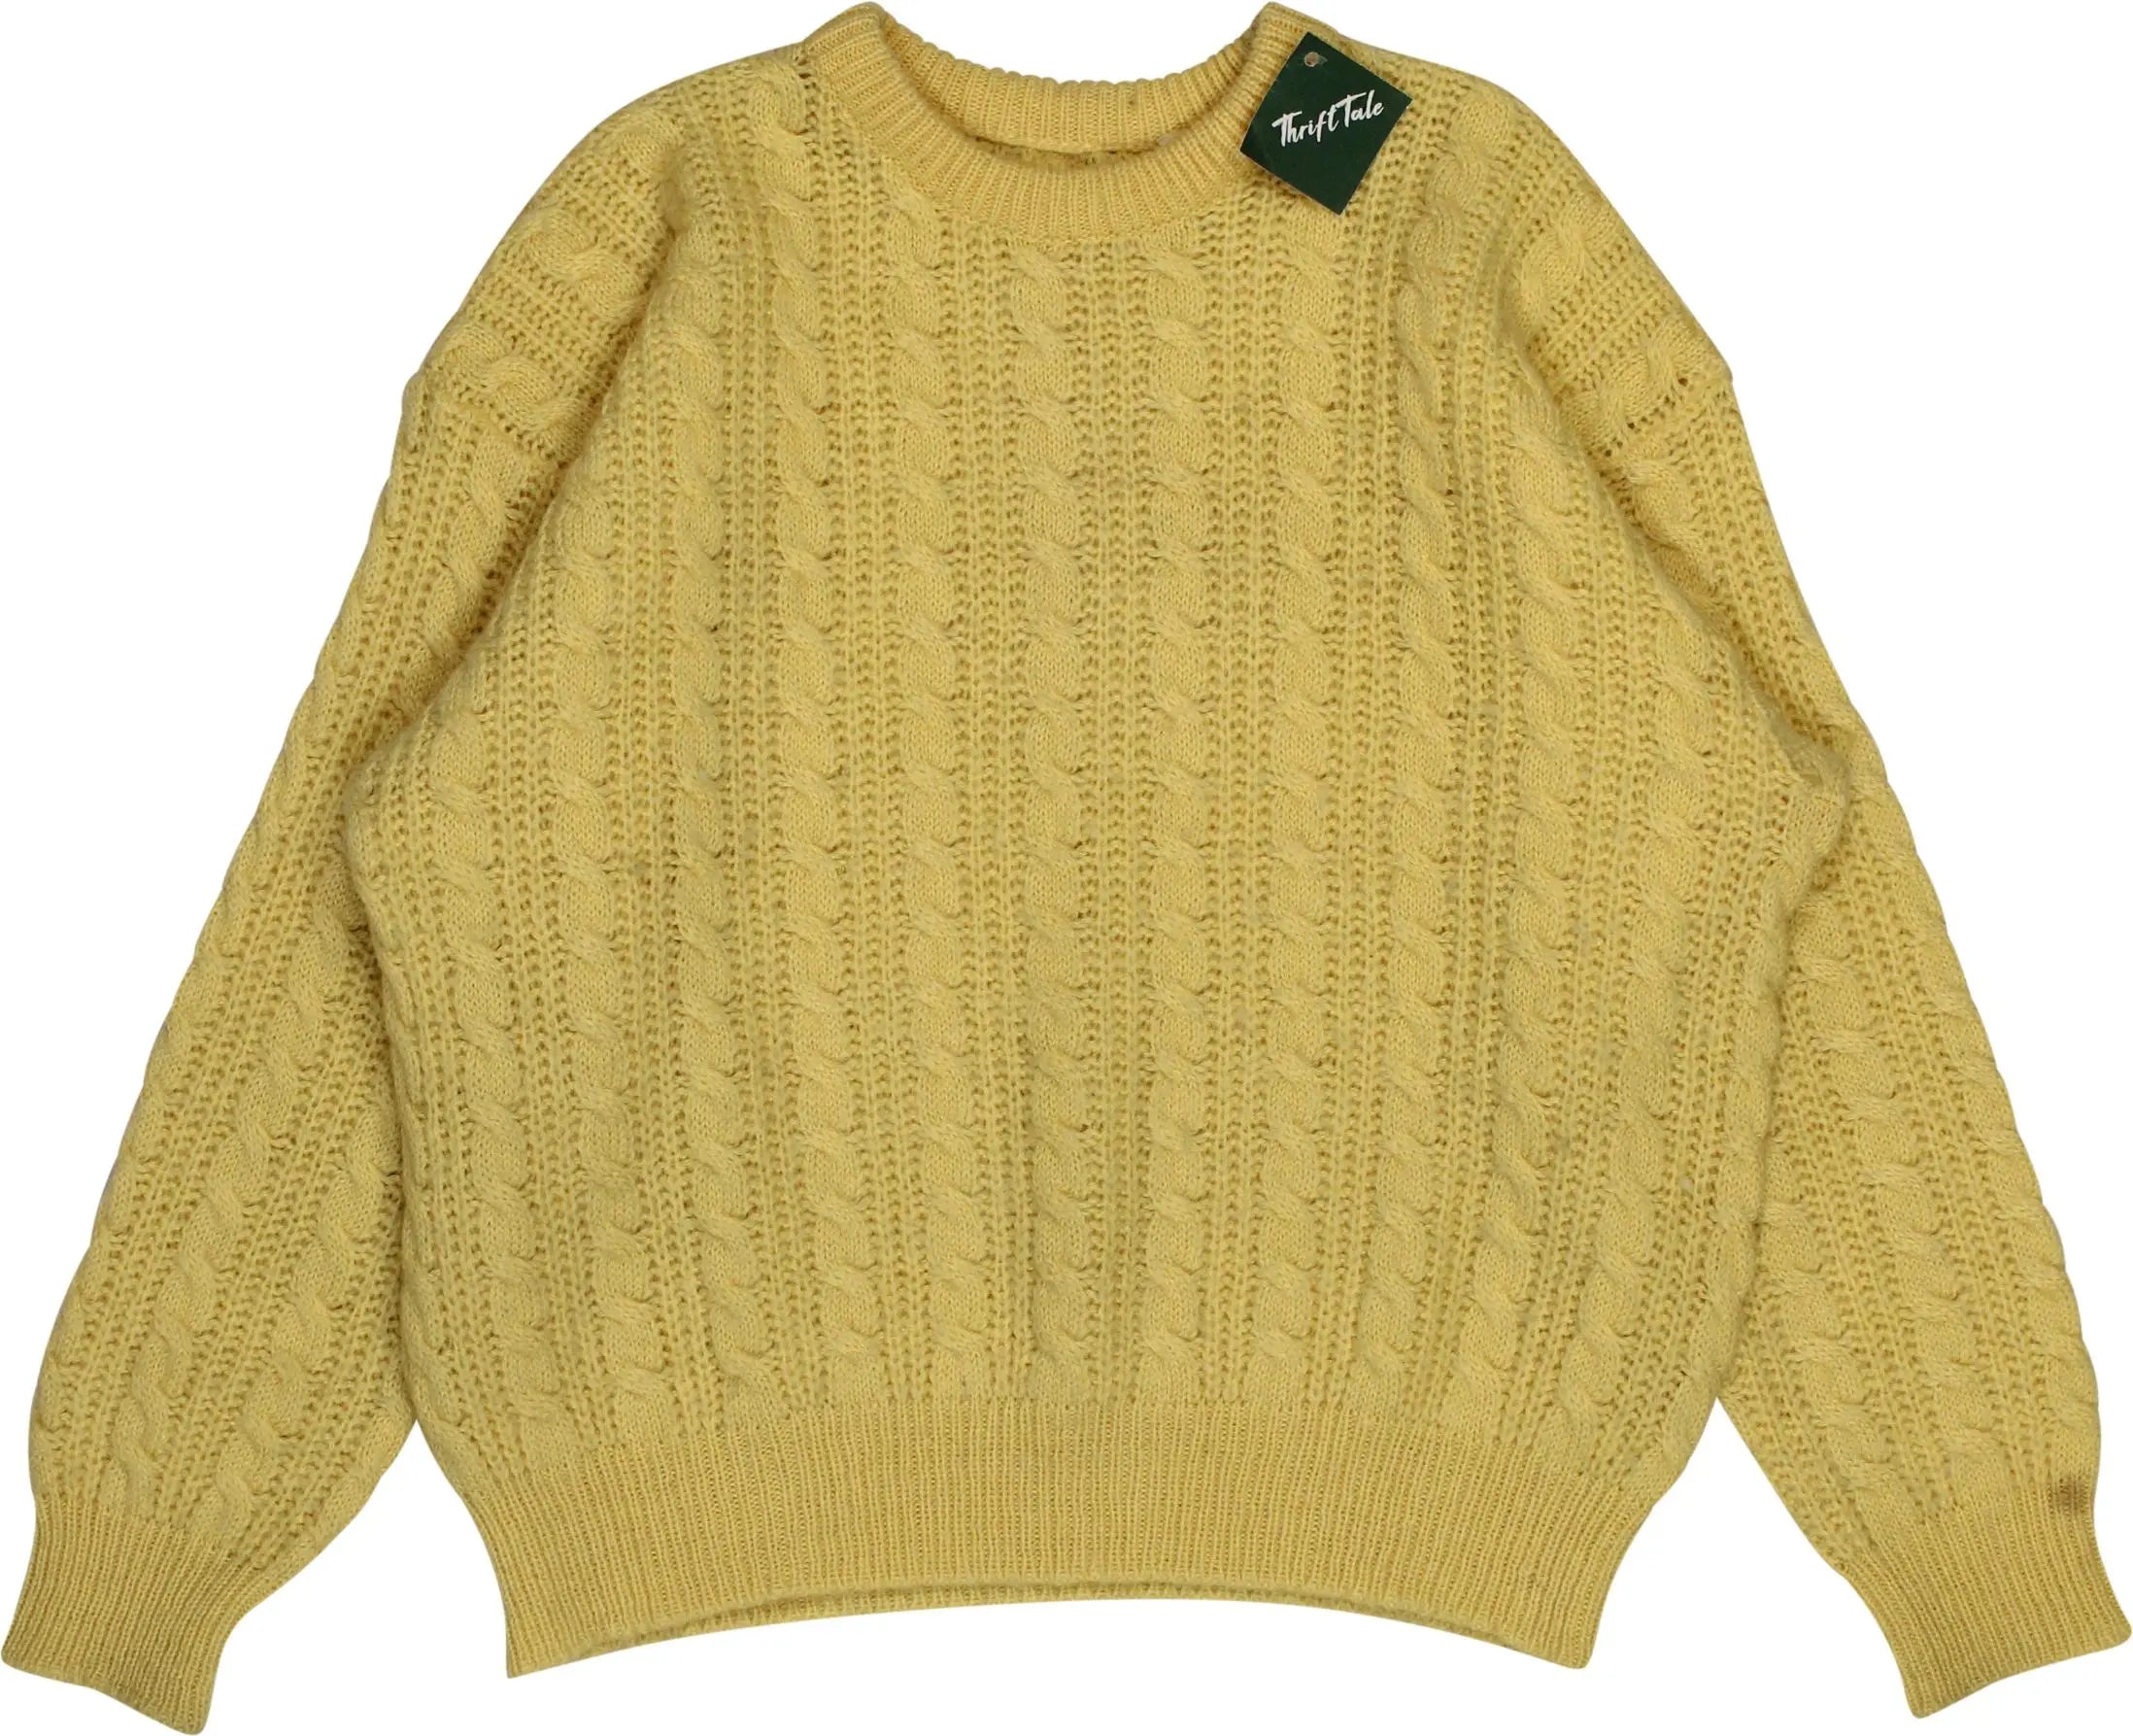 Unknown - 90s Cable Knit Jumper- ThriftTale.com - Vintage and second handclothing